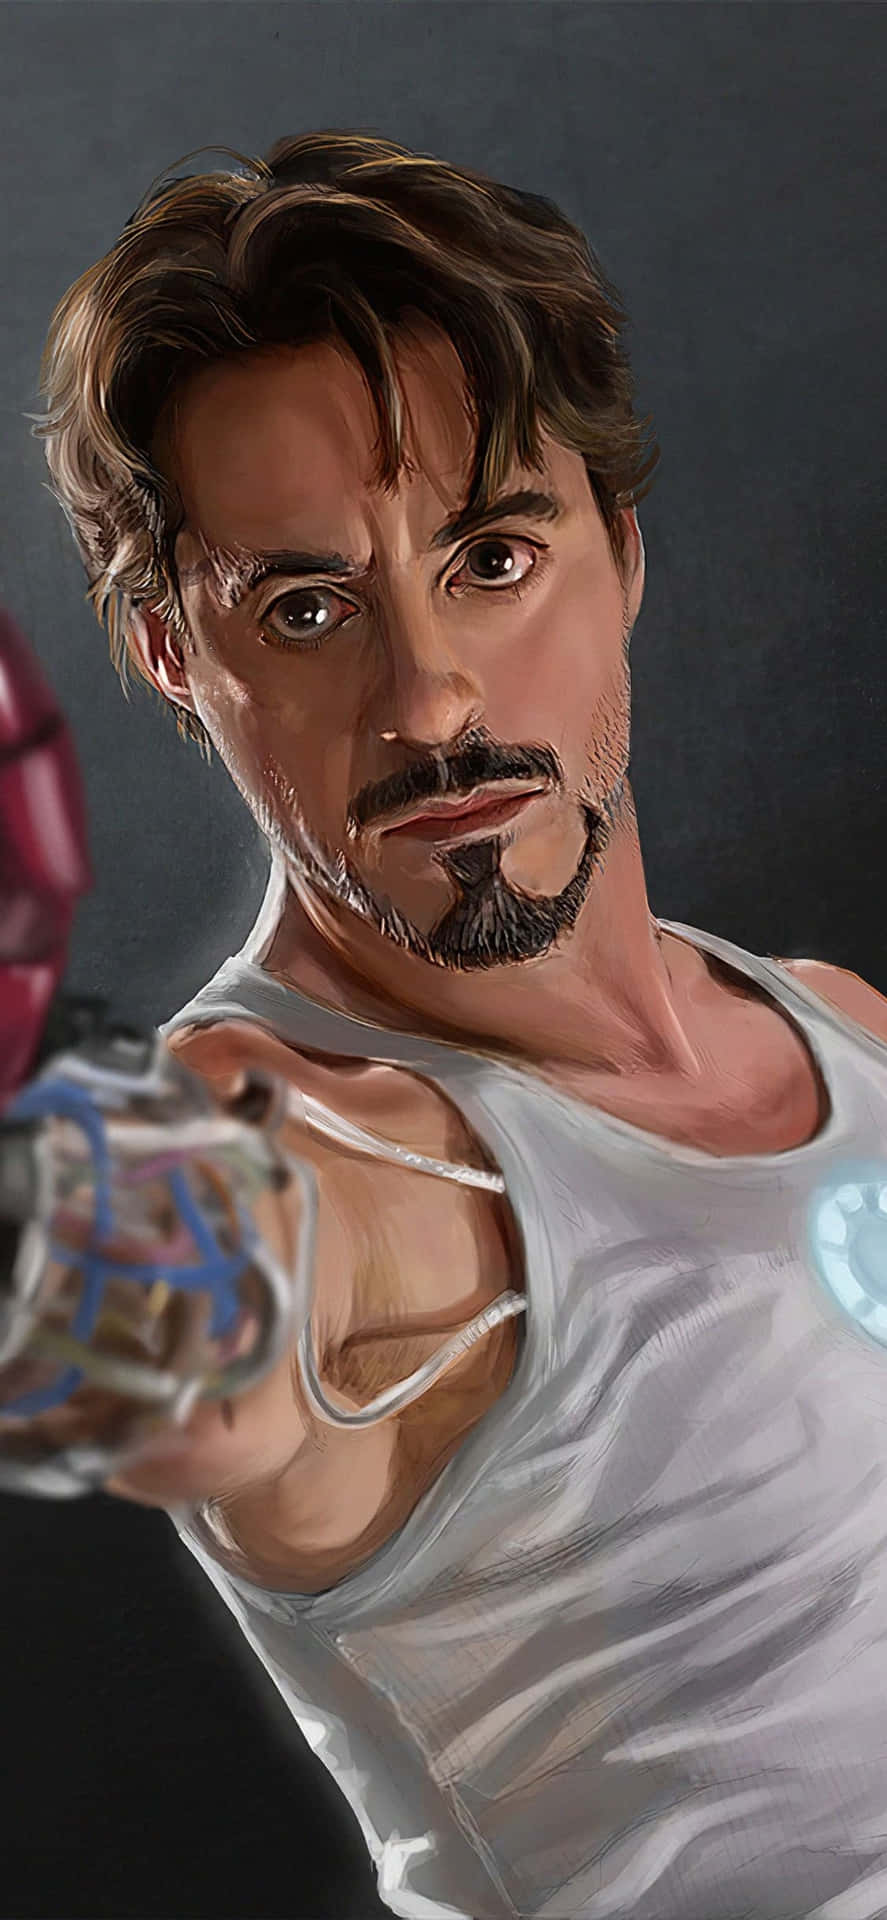 Iphone X Iron Man Background Tony Stark With Out His Suit